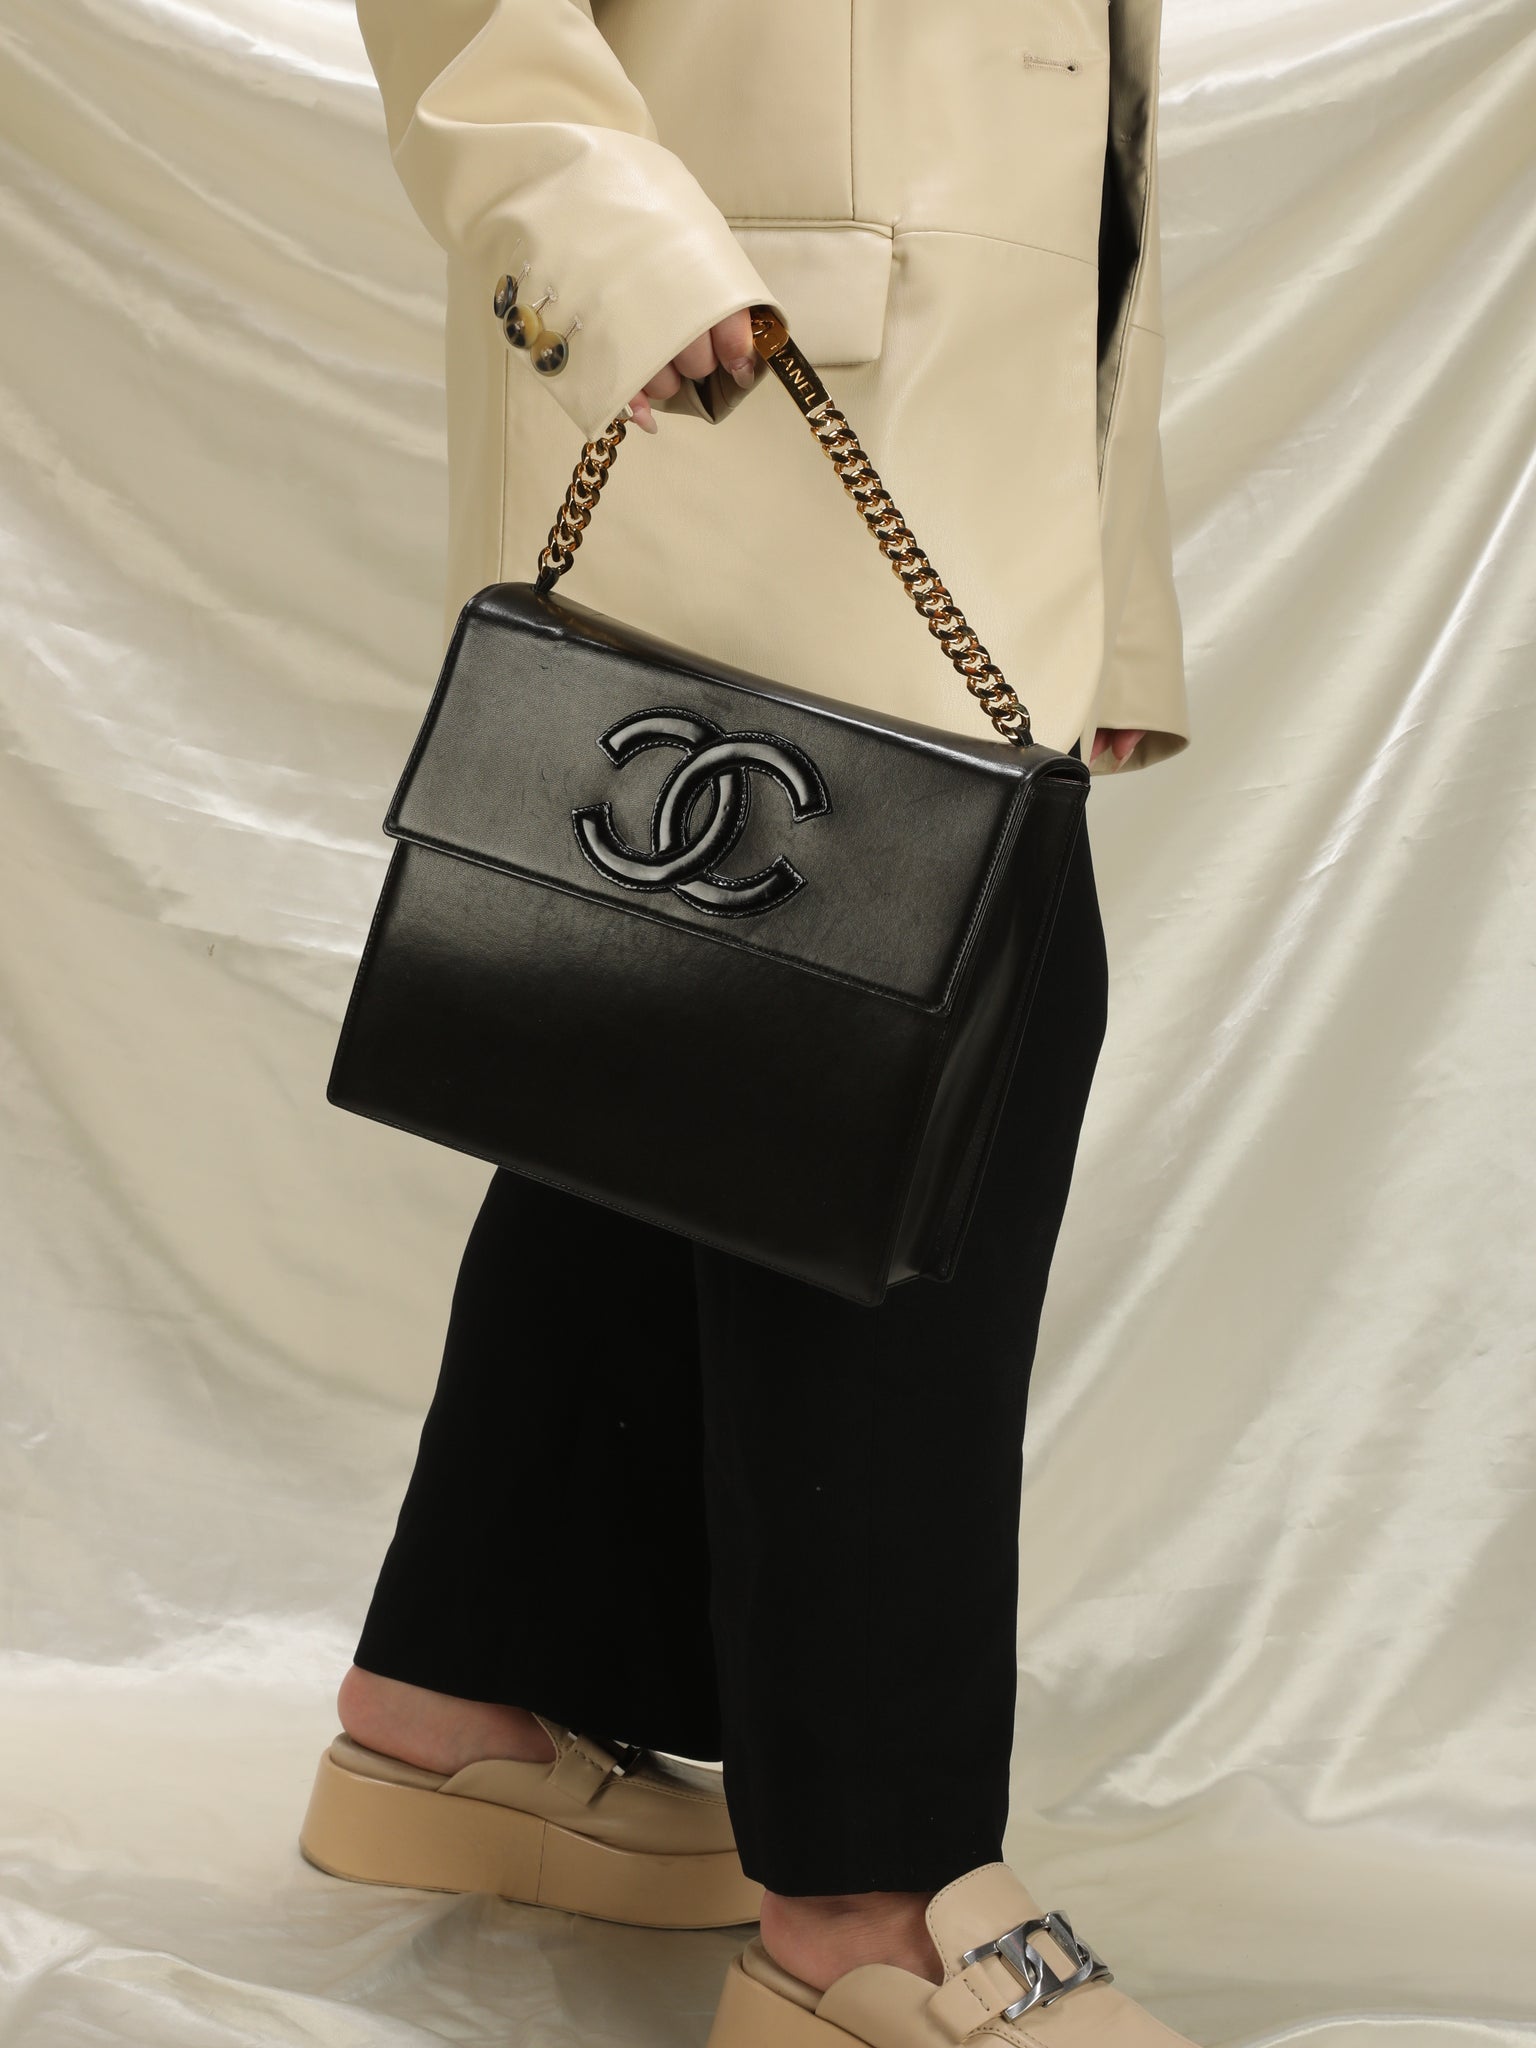 Extremely Rare Chanel Timeless Curb Chain Bag